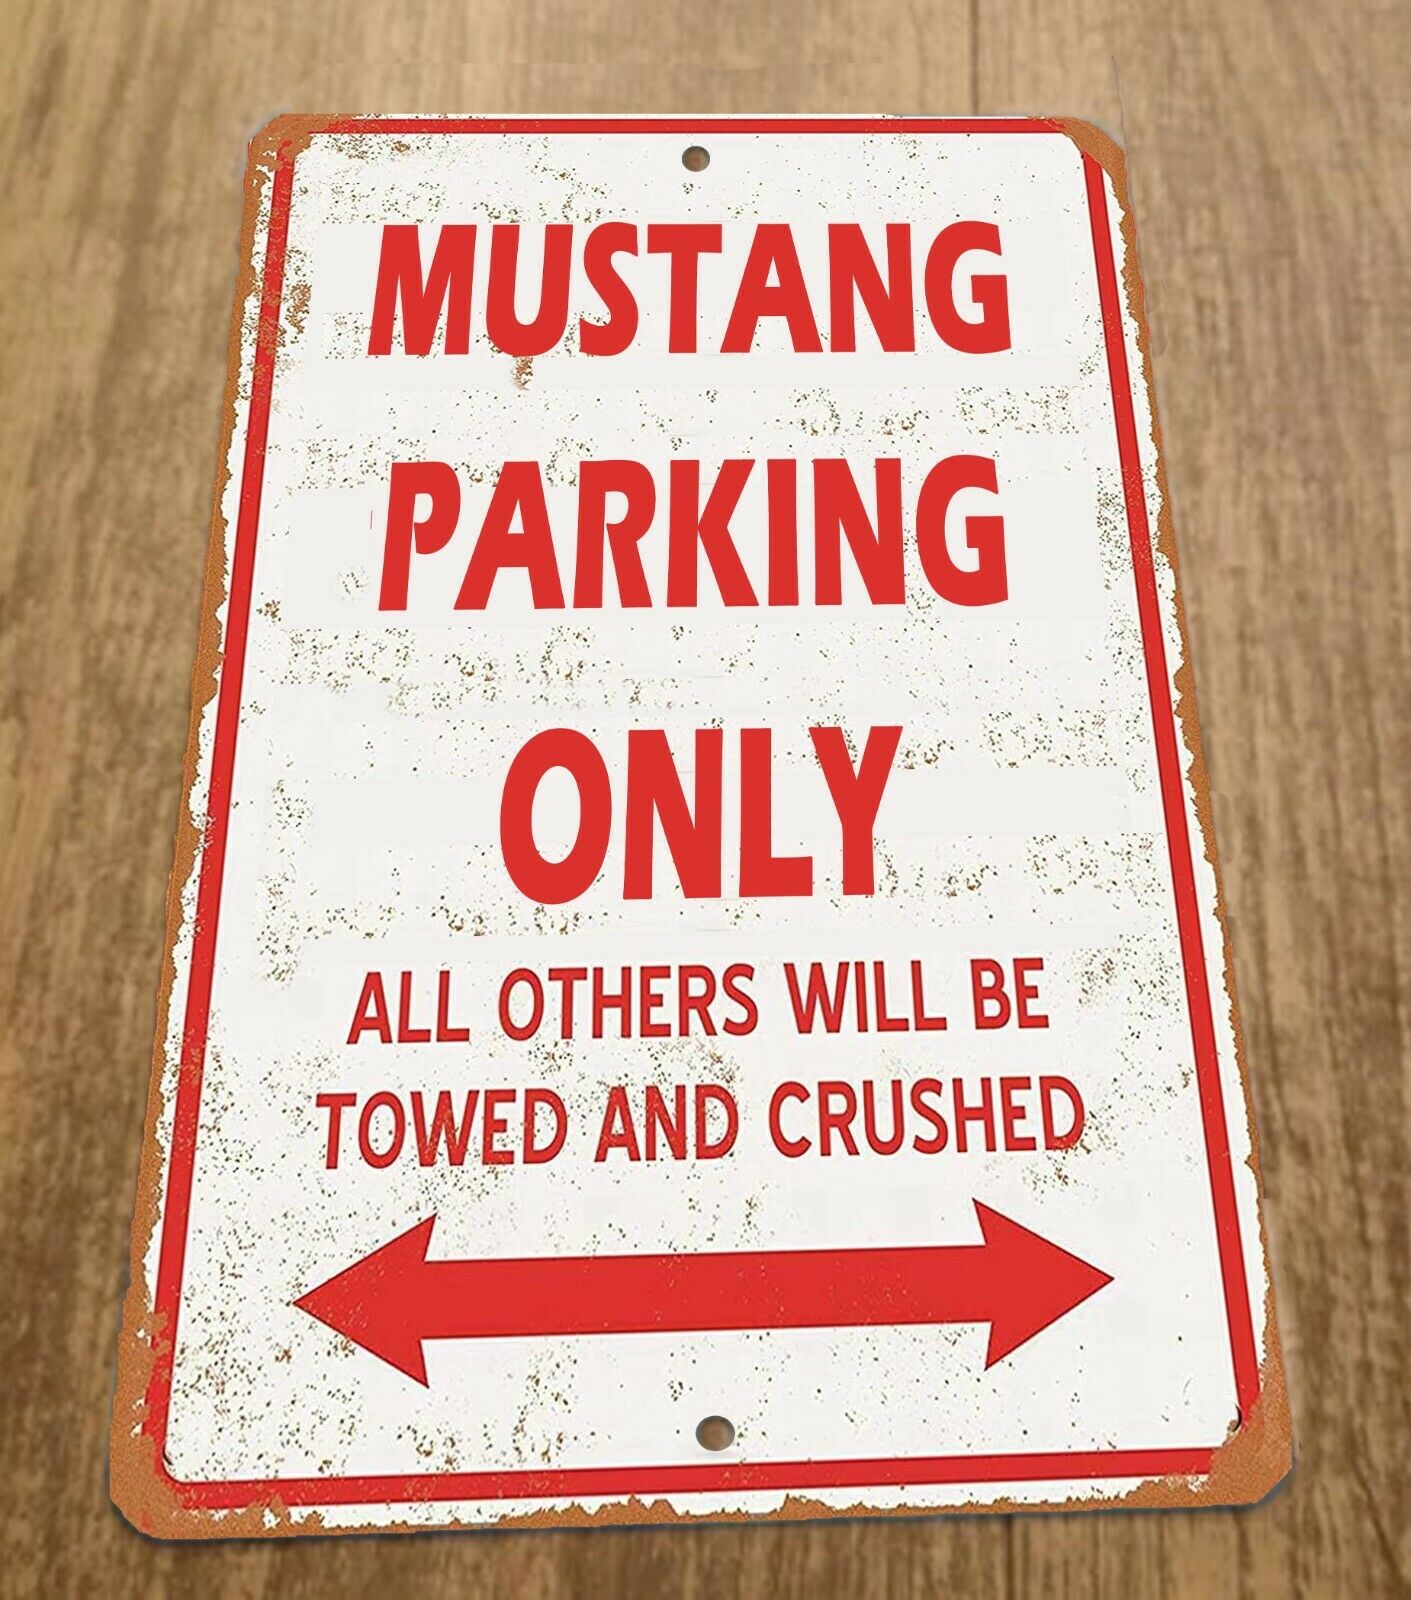 Mustang Parking Only All Others Will be Towed and Crushed 8x12 Metal Wall Car Sign Garage Poster